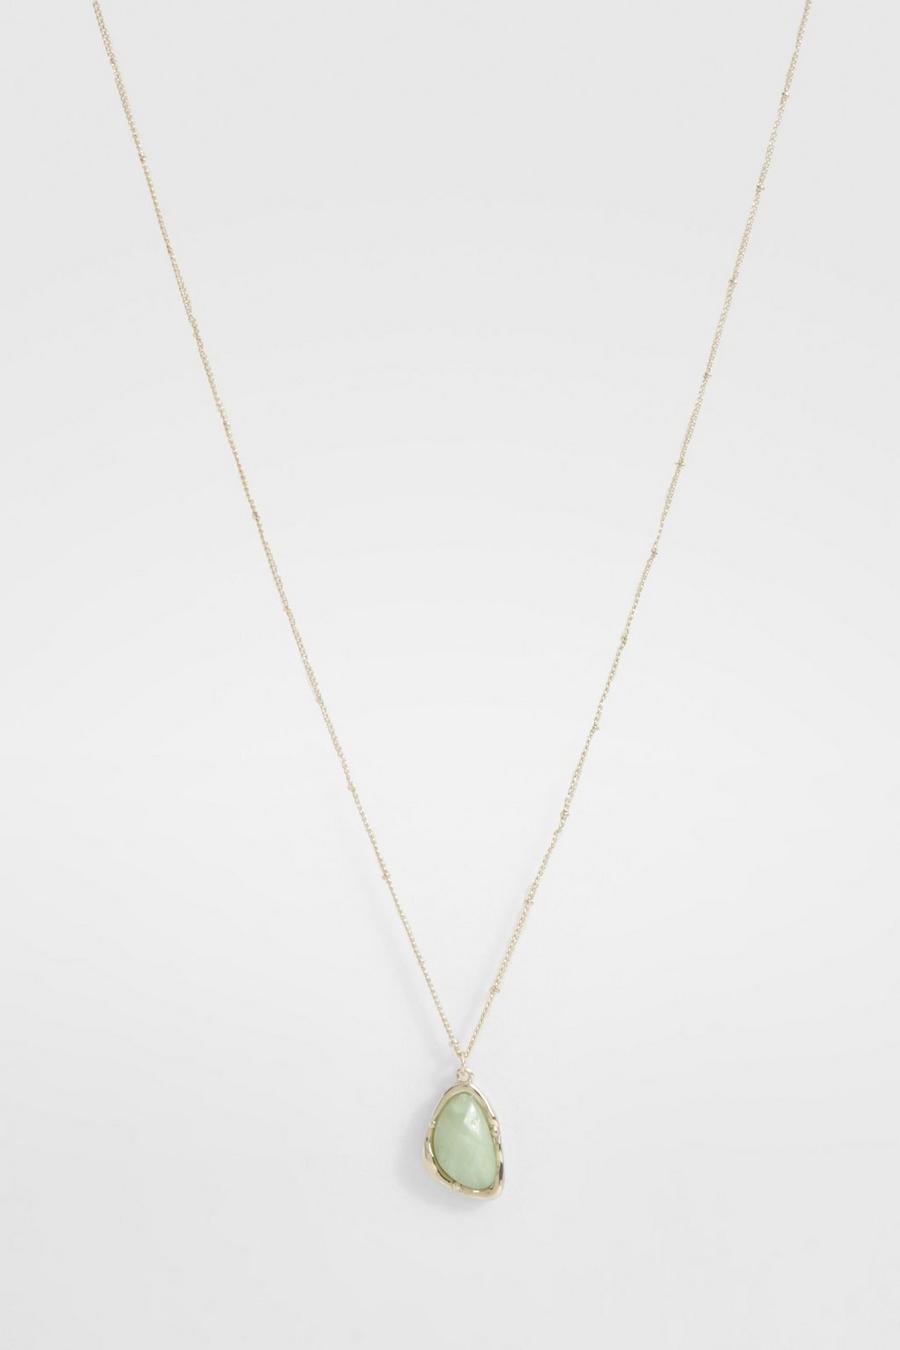 Gold Green Stone Pendant Necklace